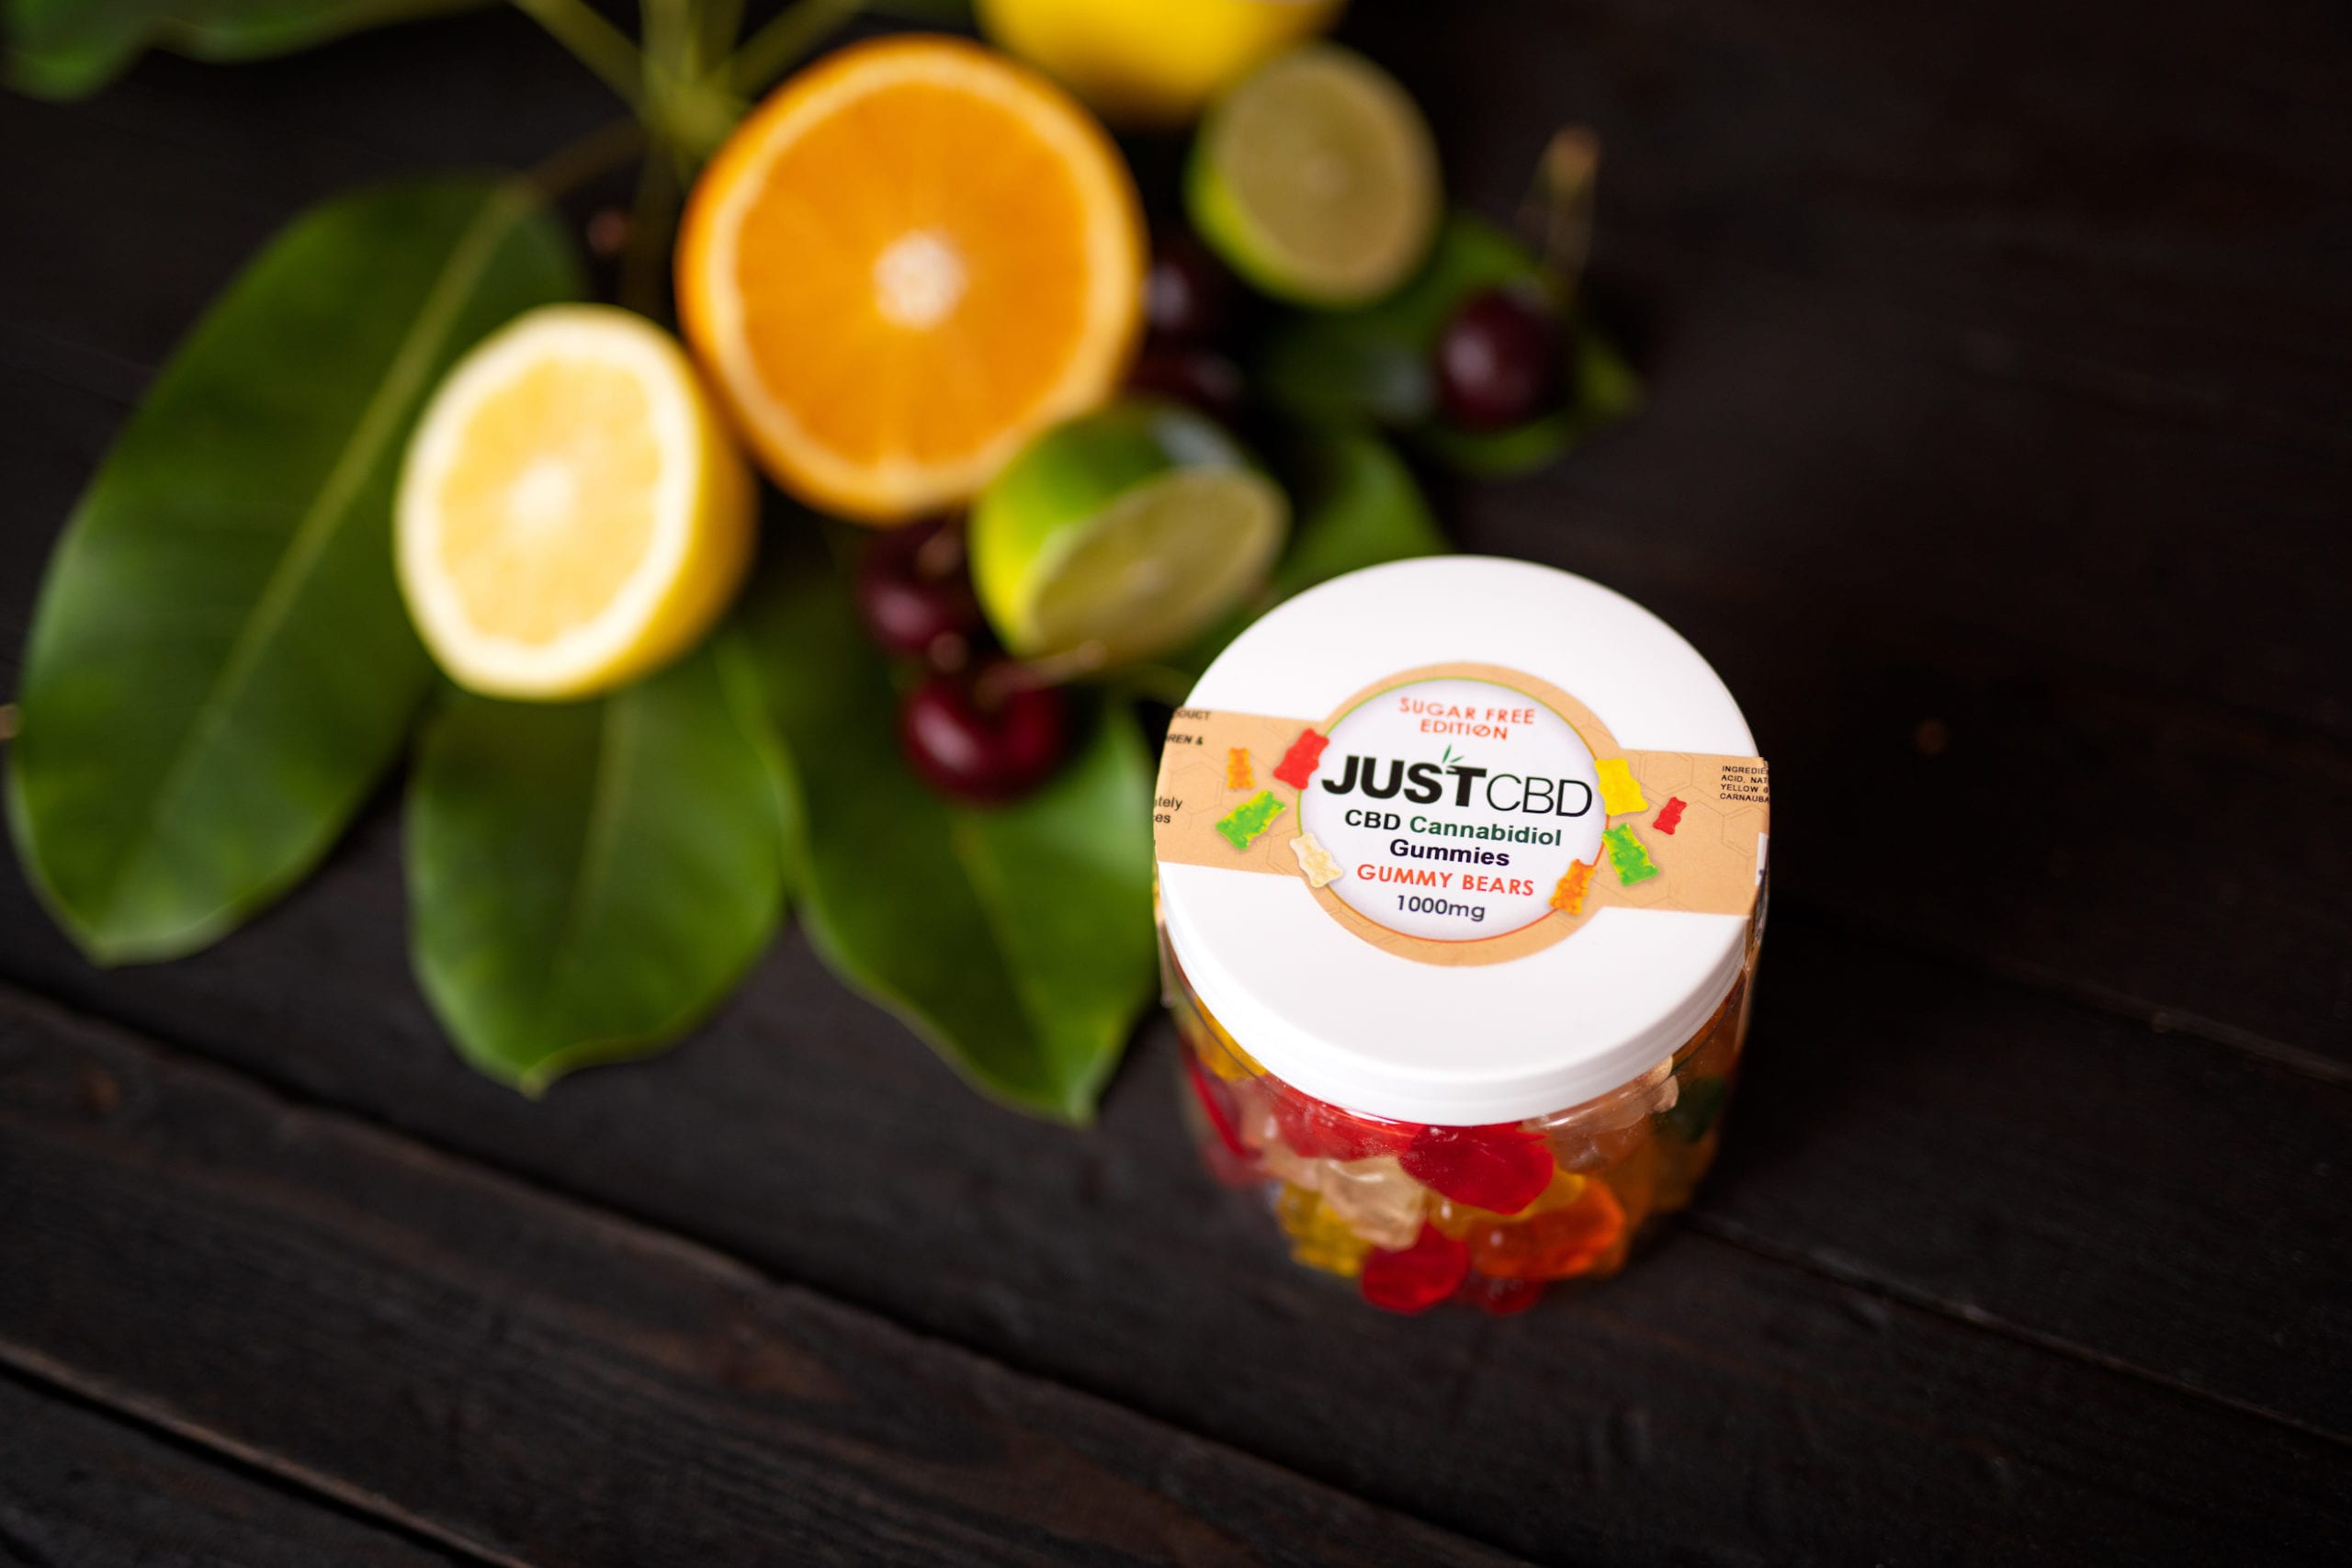 IU C&I Studios Portfolio JustCBD Product Photography and Just CBD Products Sugar free gummy bears on display with citrus fruit and cherries nearby